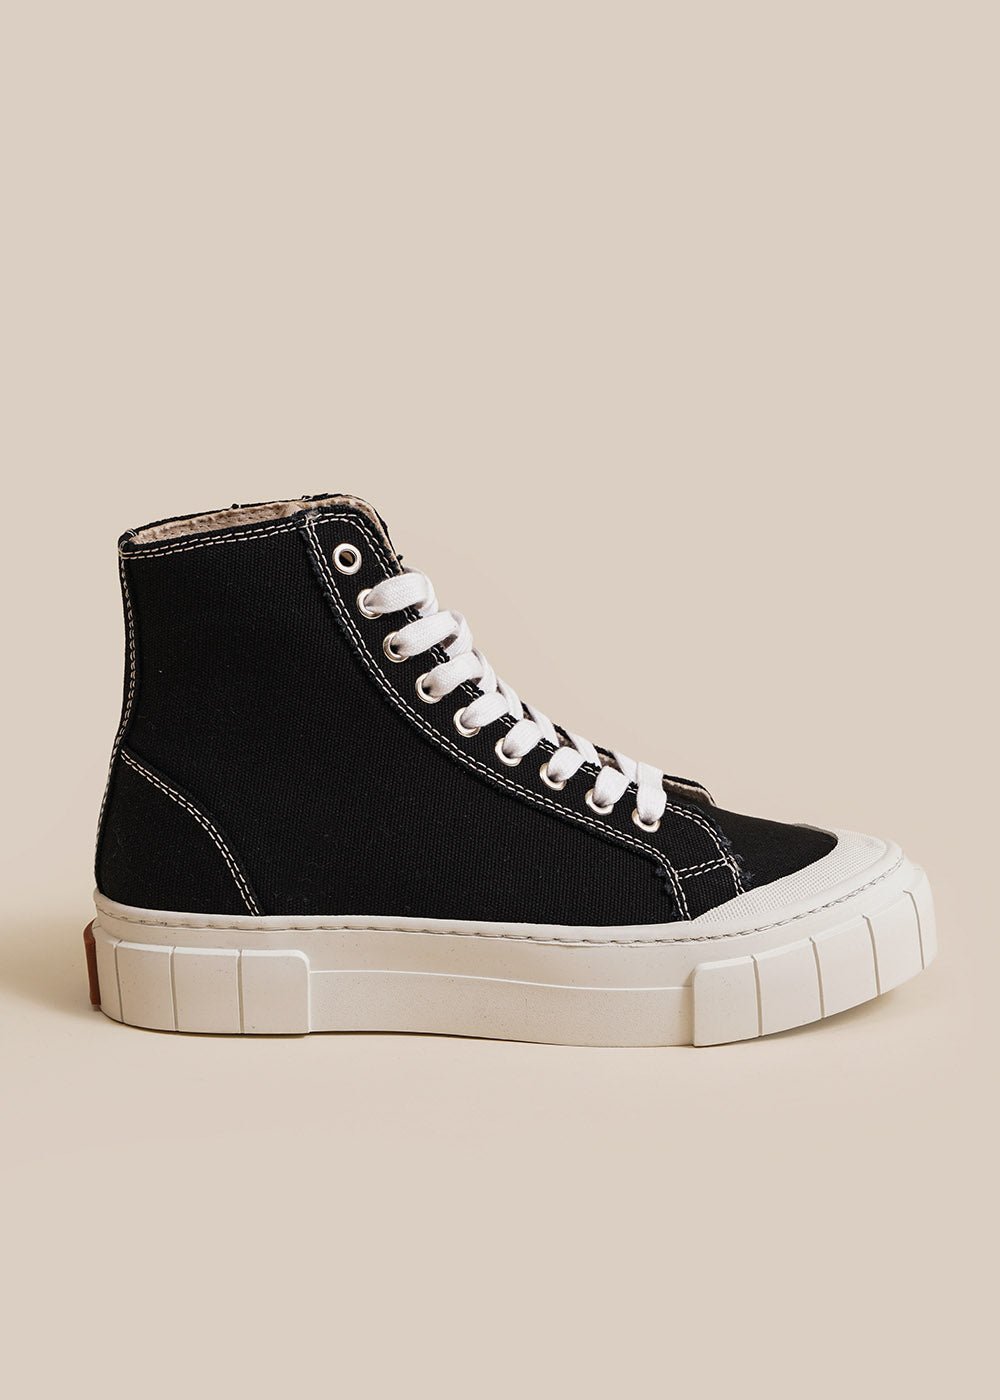 GOOD NEWS Black Juice Sneakers - New Classics Studios Sustainable Ethical Fashion Canada